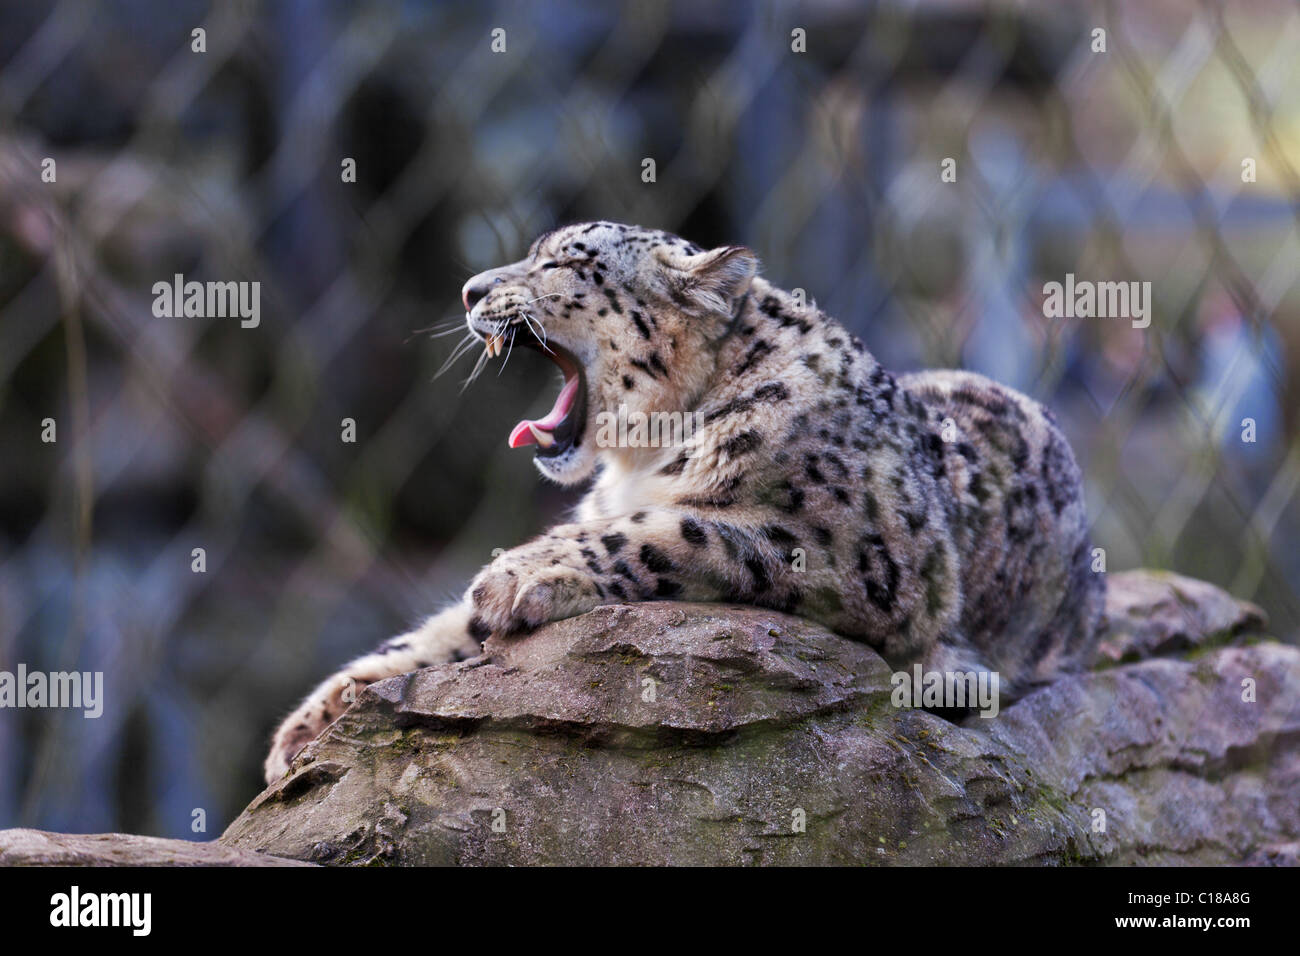 Snow leopard sat on a rock yawning Stock Photo